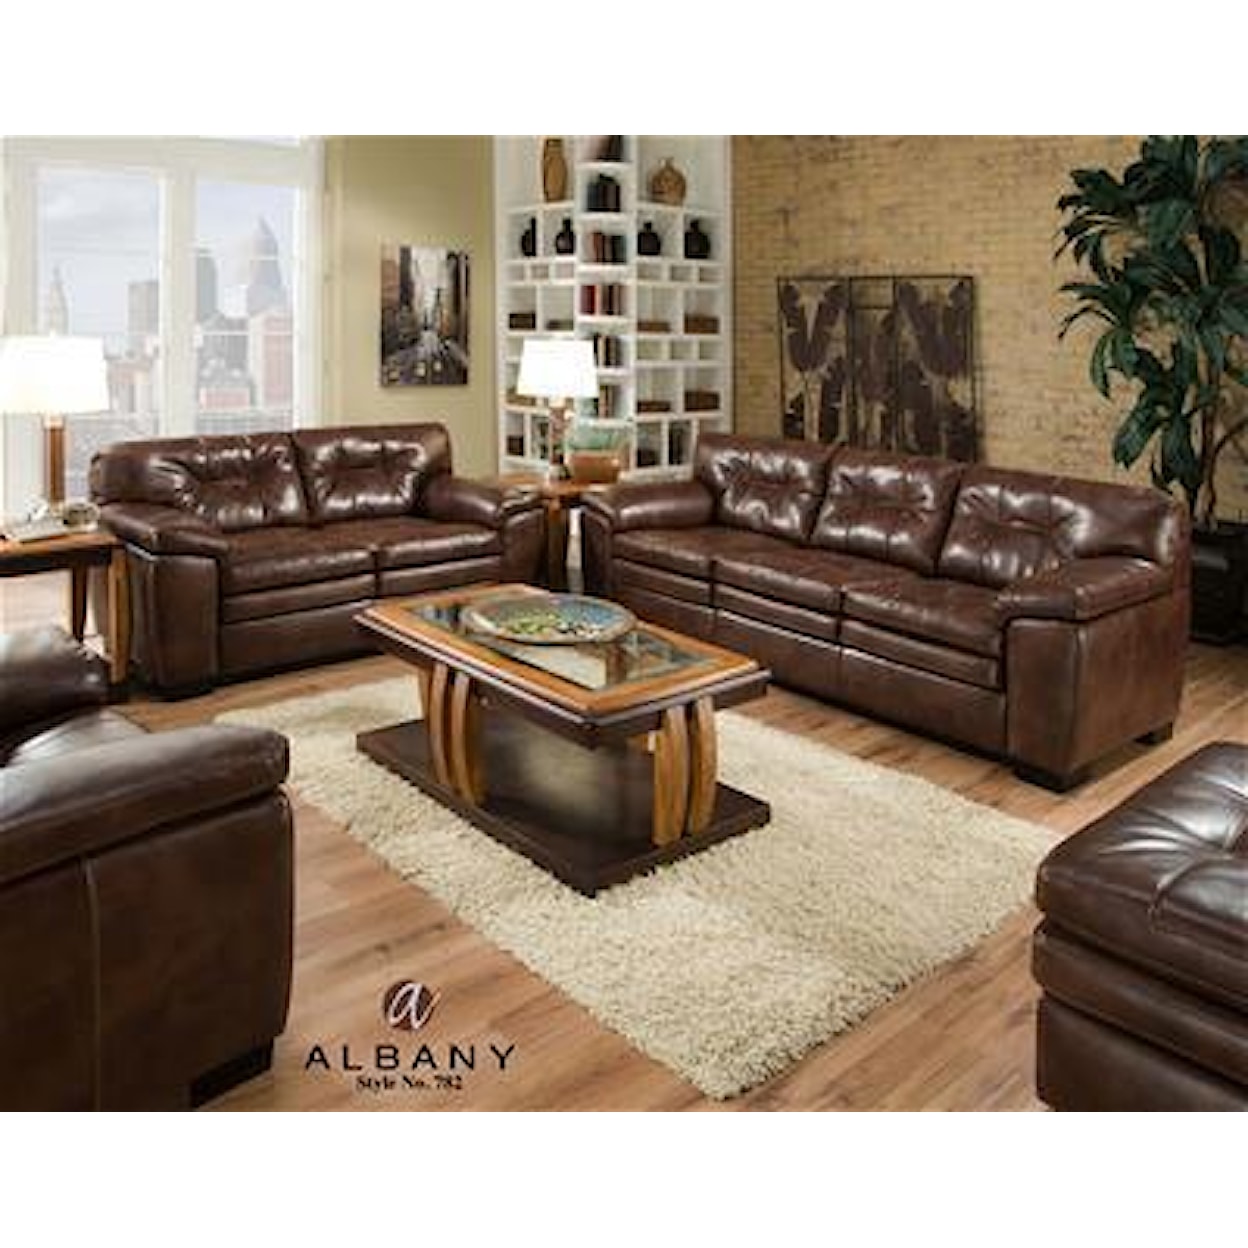 Albany 782 Casual Love Seat